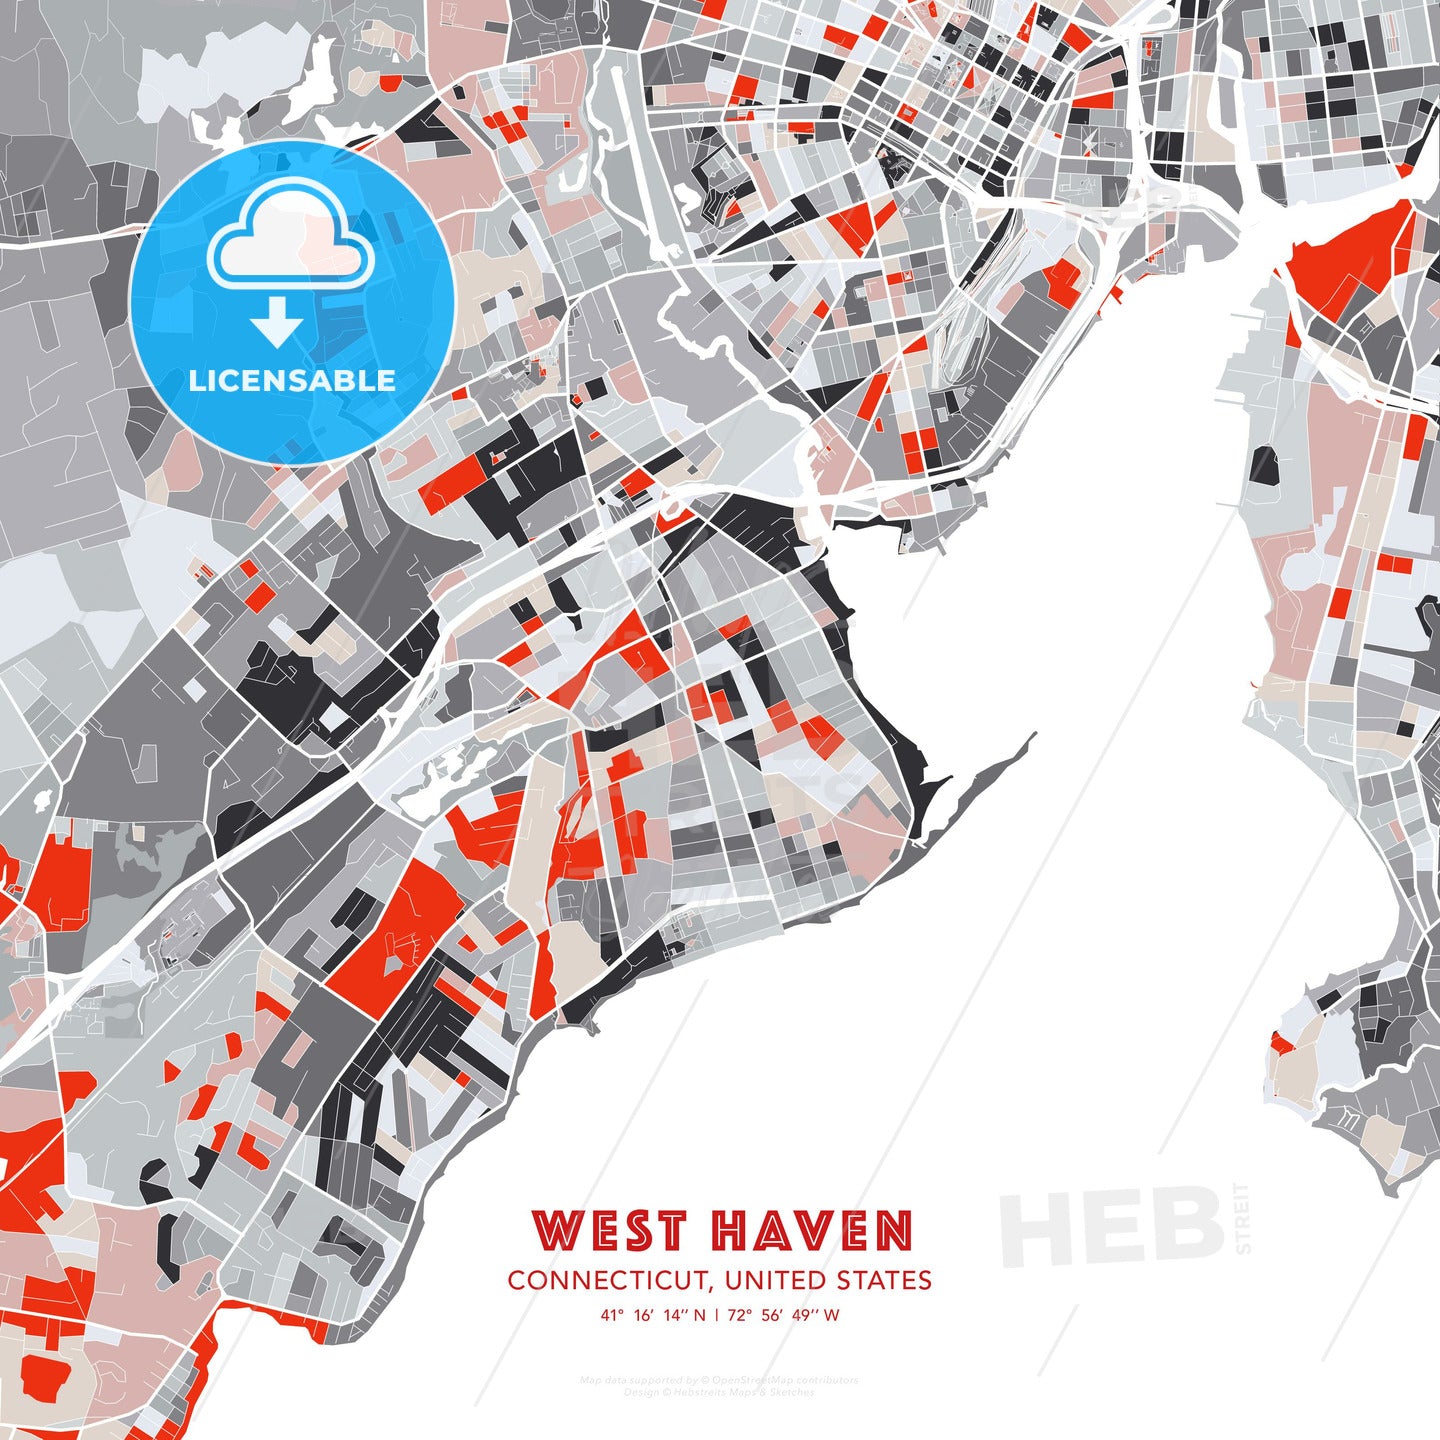 West Haven, Connecticut, United States, modern map - HEBSTREITS Sketches